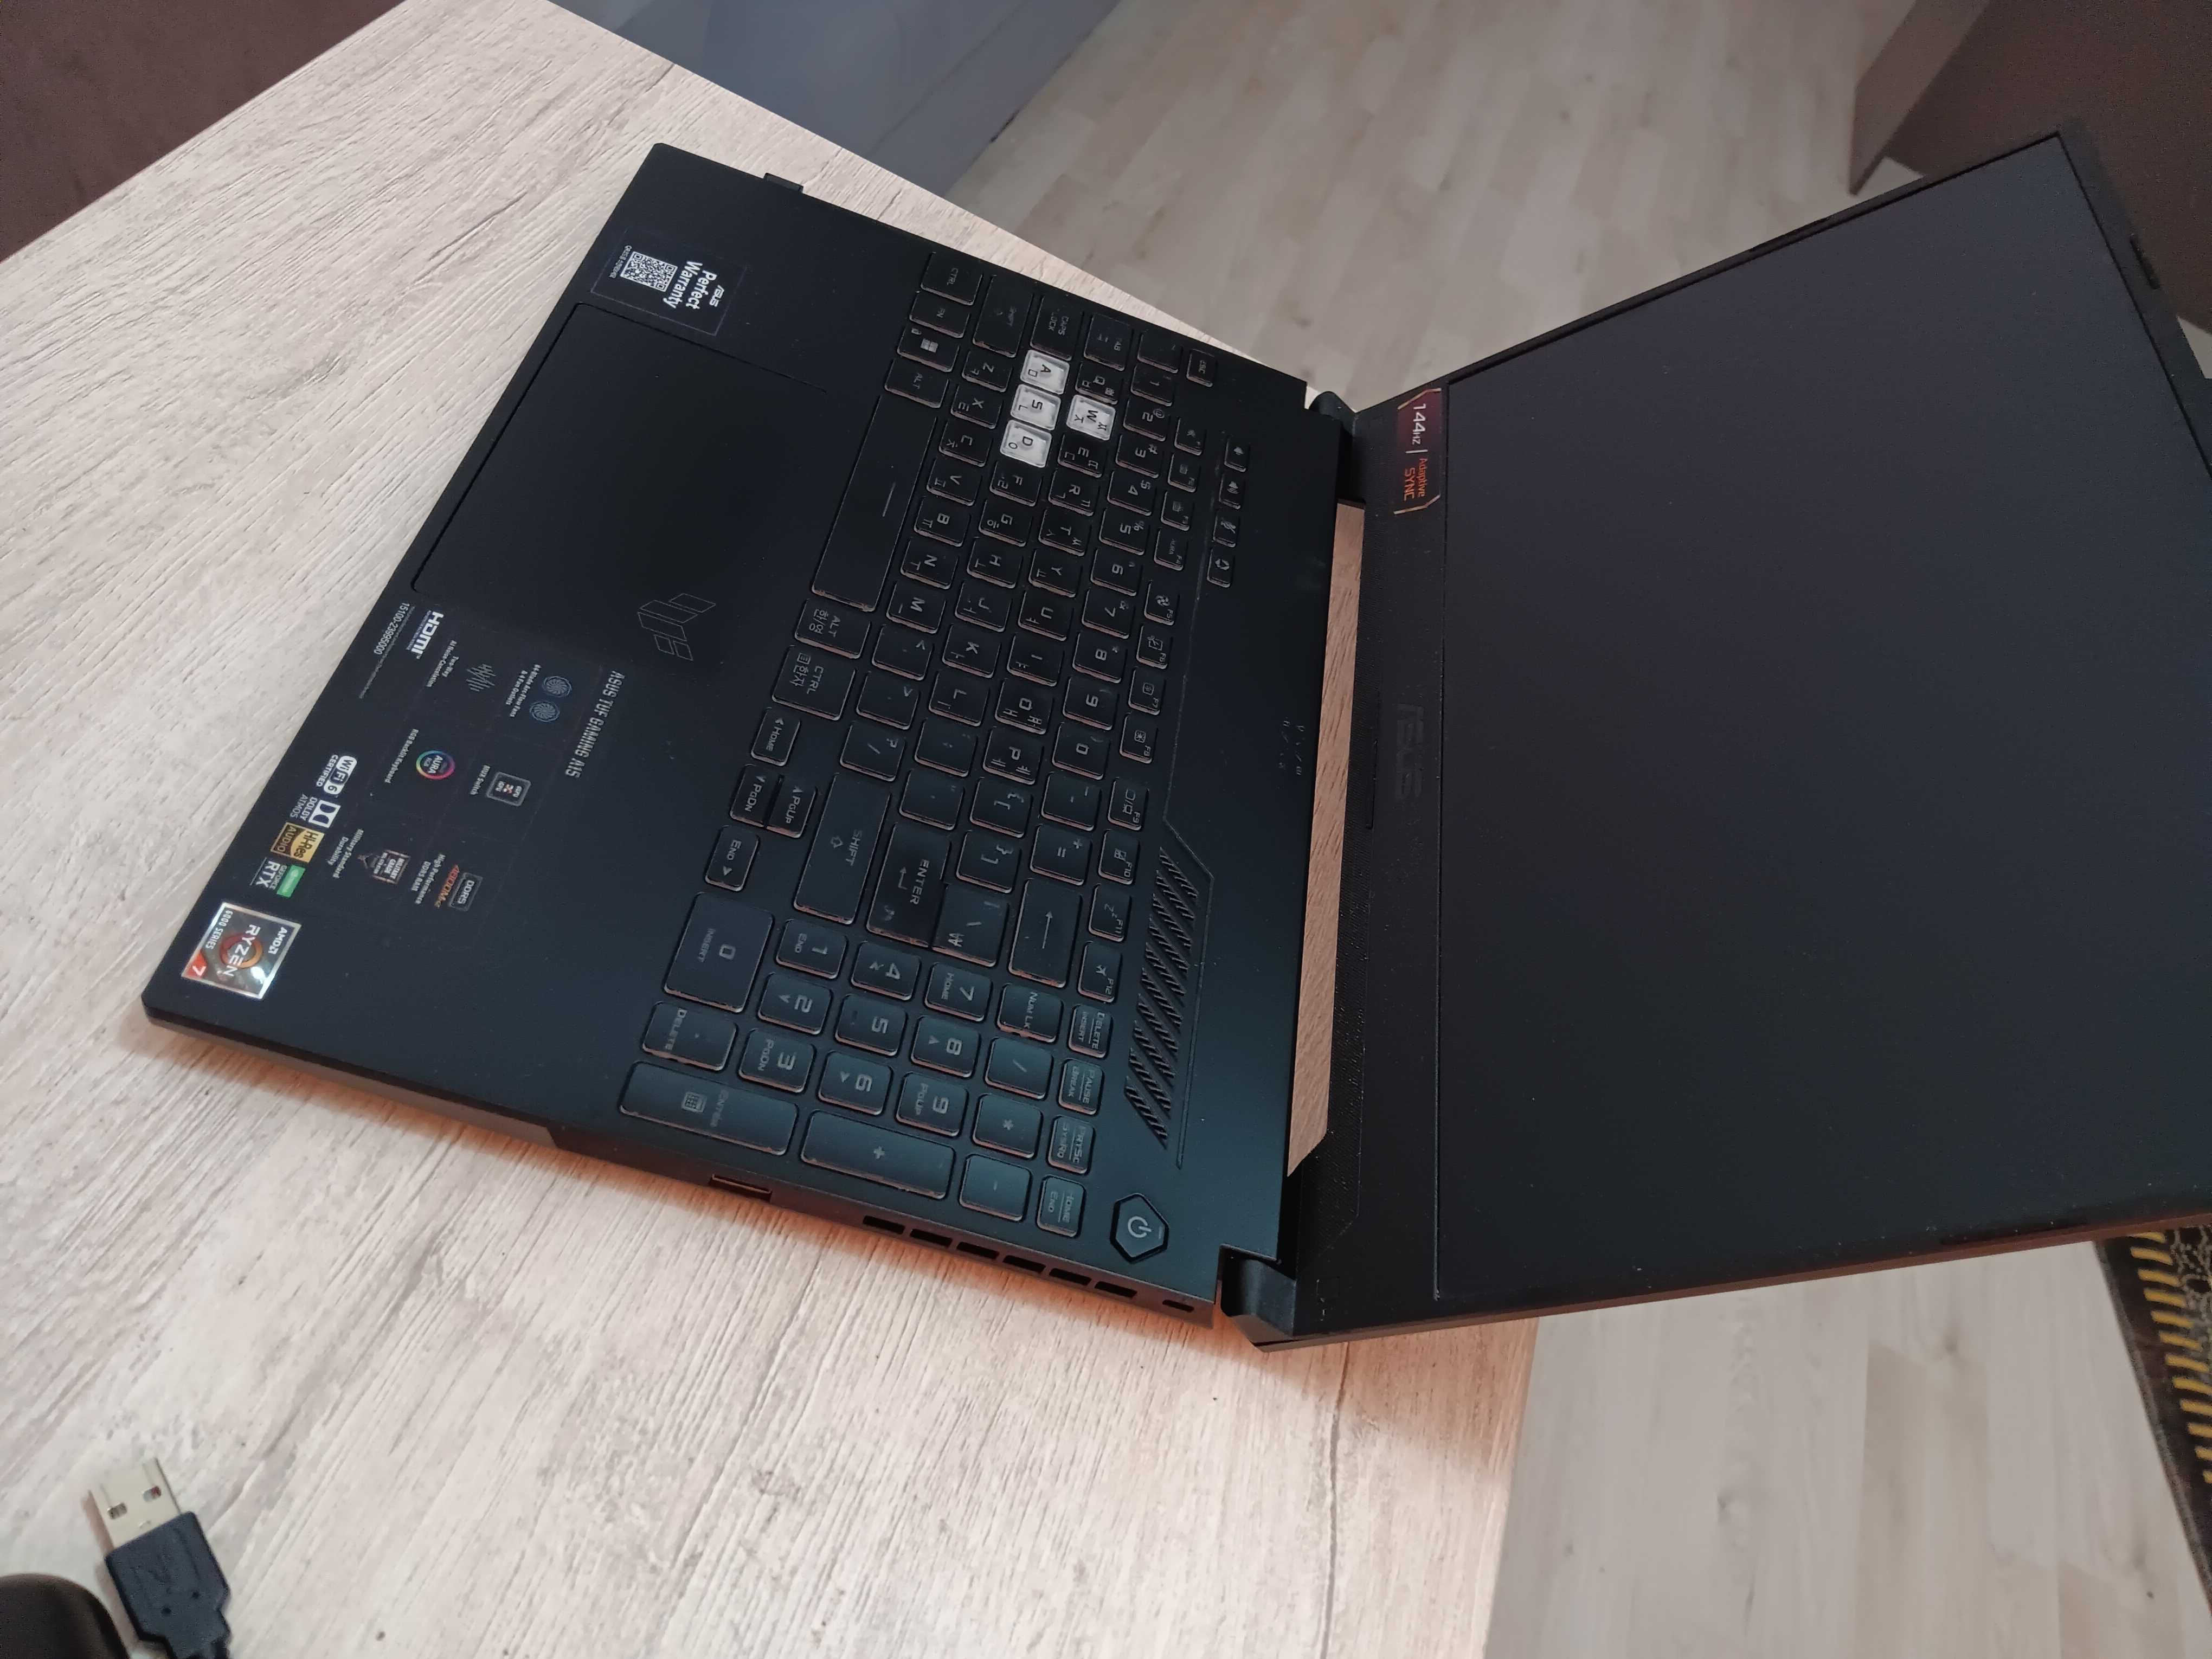 ASUS GAMING LAPTOP  in a good condition